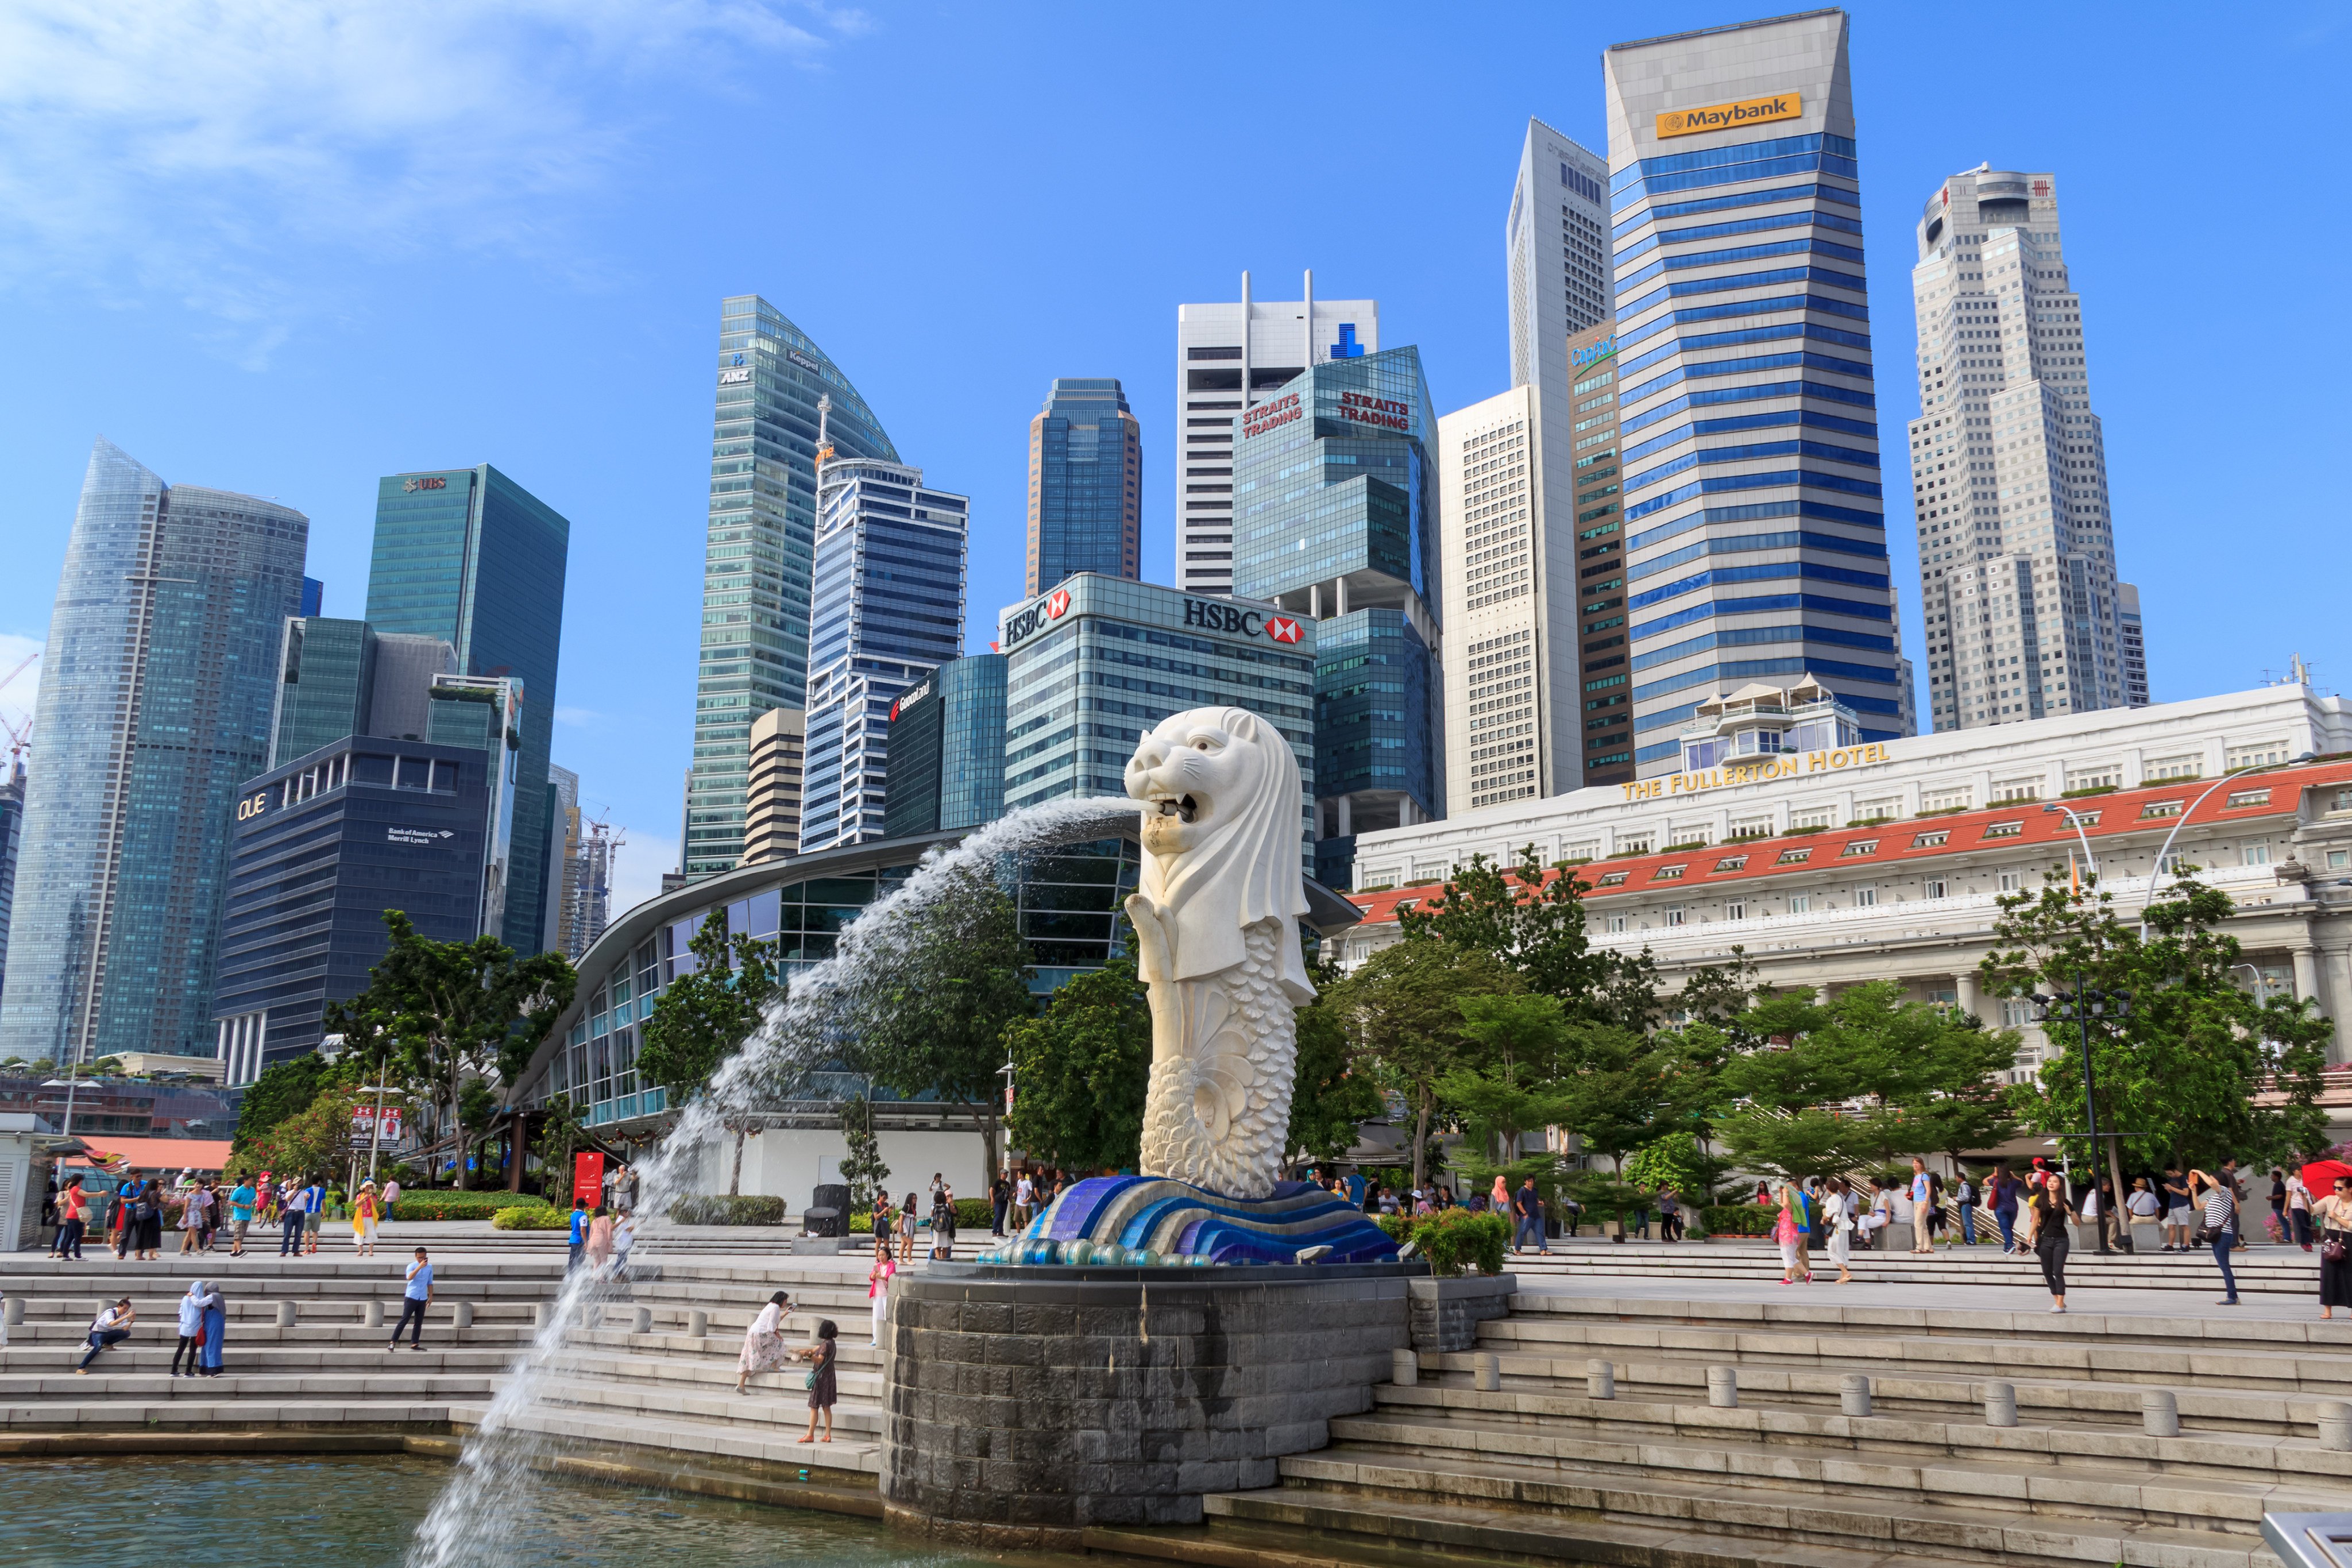 Mainland Chinese passport holders currently need a visa to visit Singapore. Photo: Shutterstock